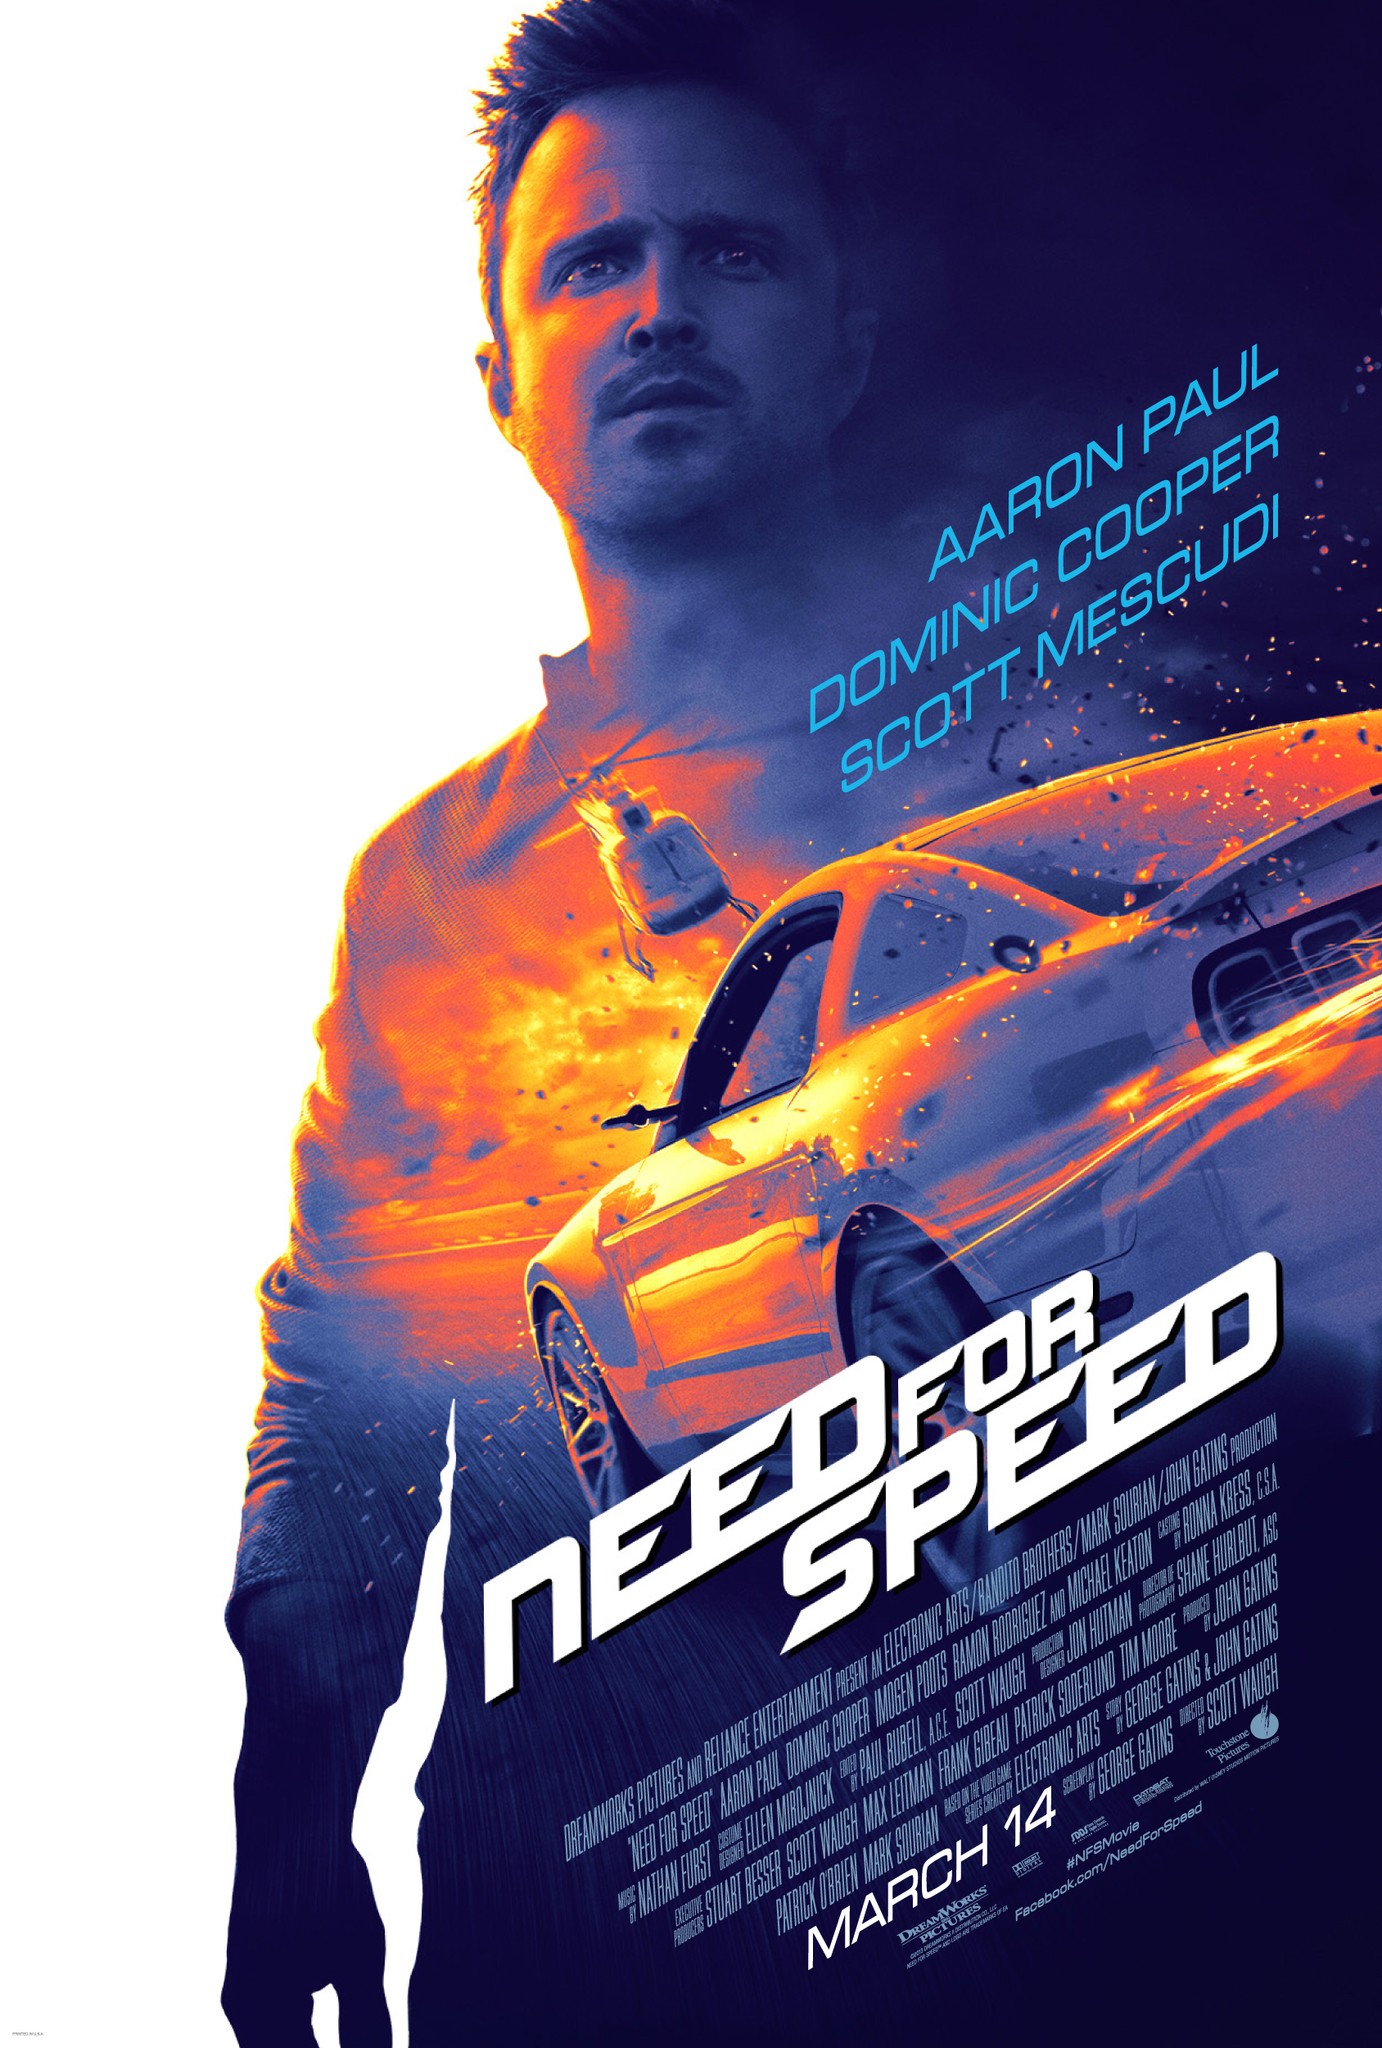 064-need_for_speed_xxlg.jpg